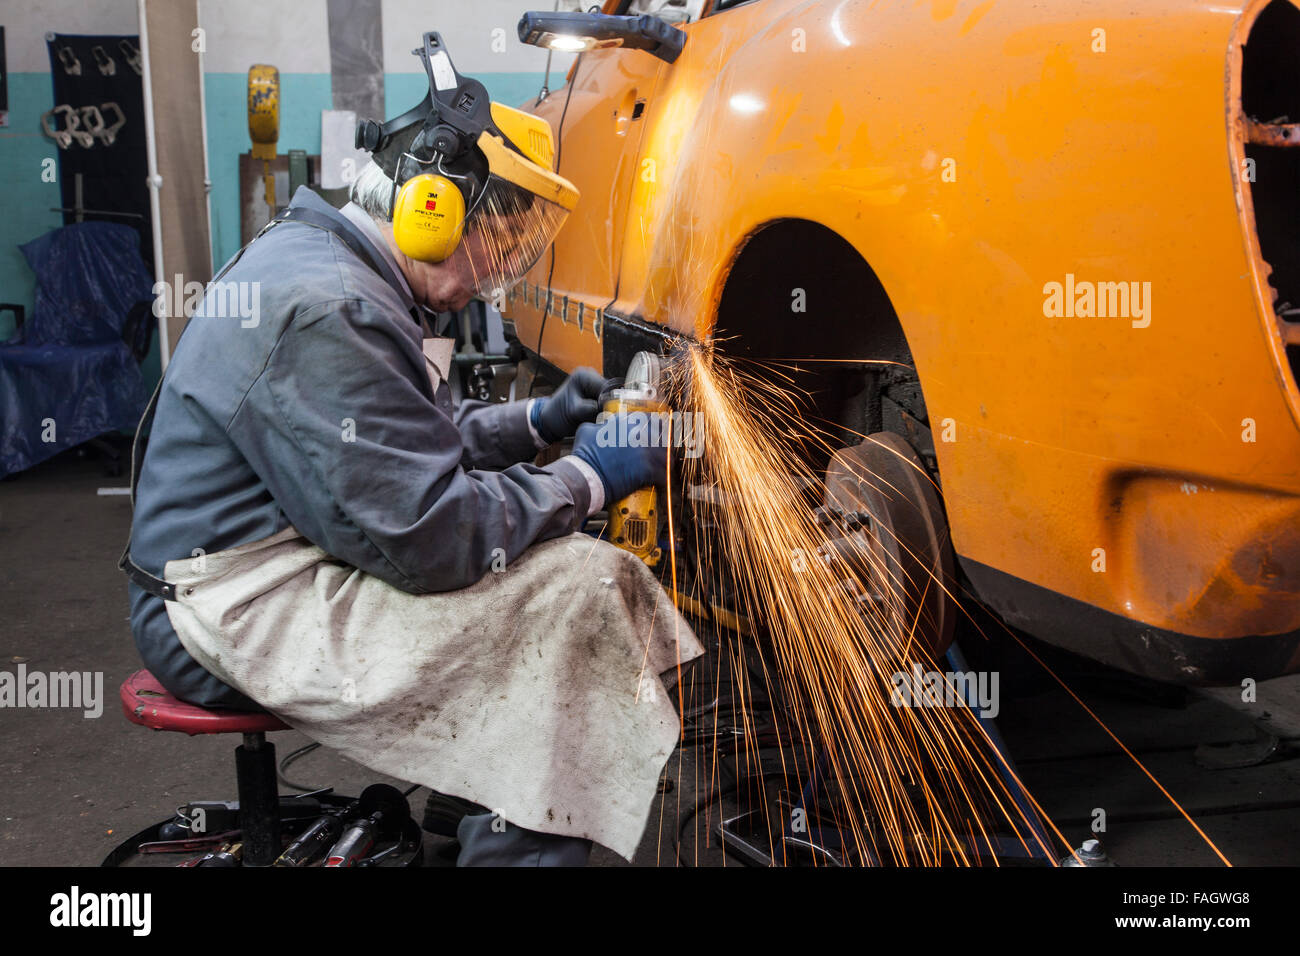 Coachbuilder restores a classic car VW Karmann Ghia. Welded seams are processed with angle grinder. Stock Photo